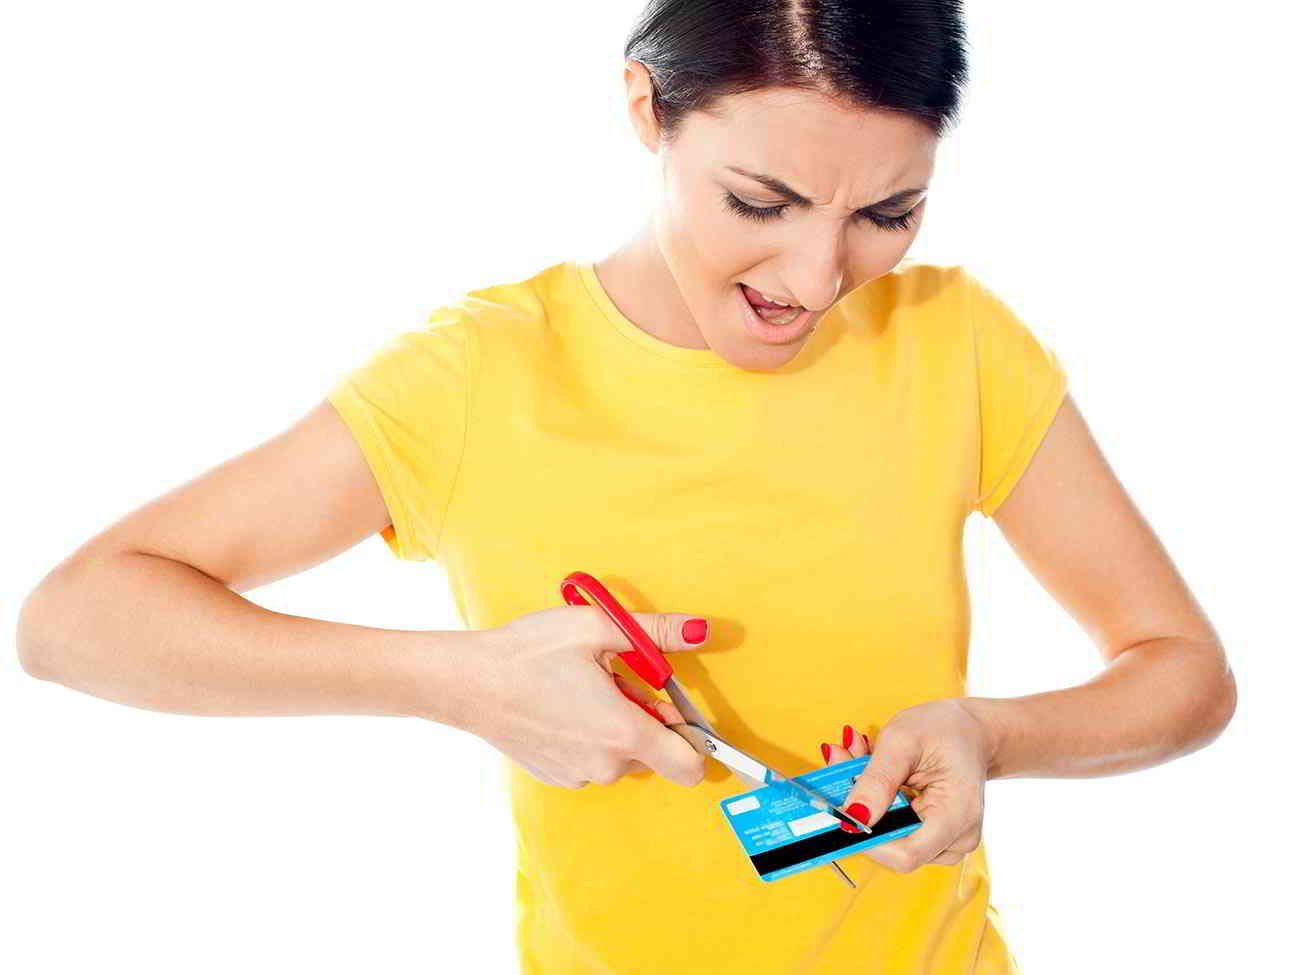 woman cutting up credit card